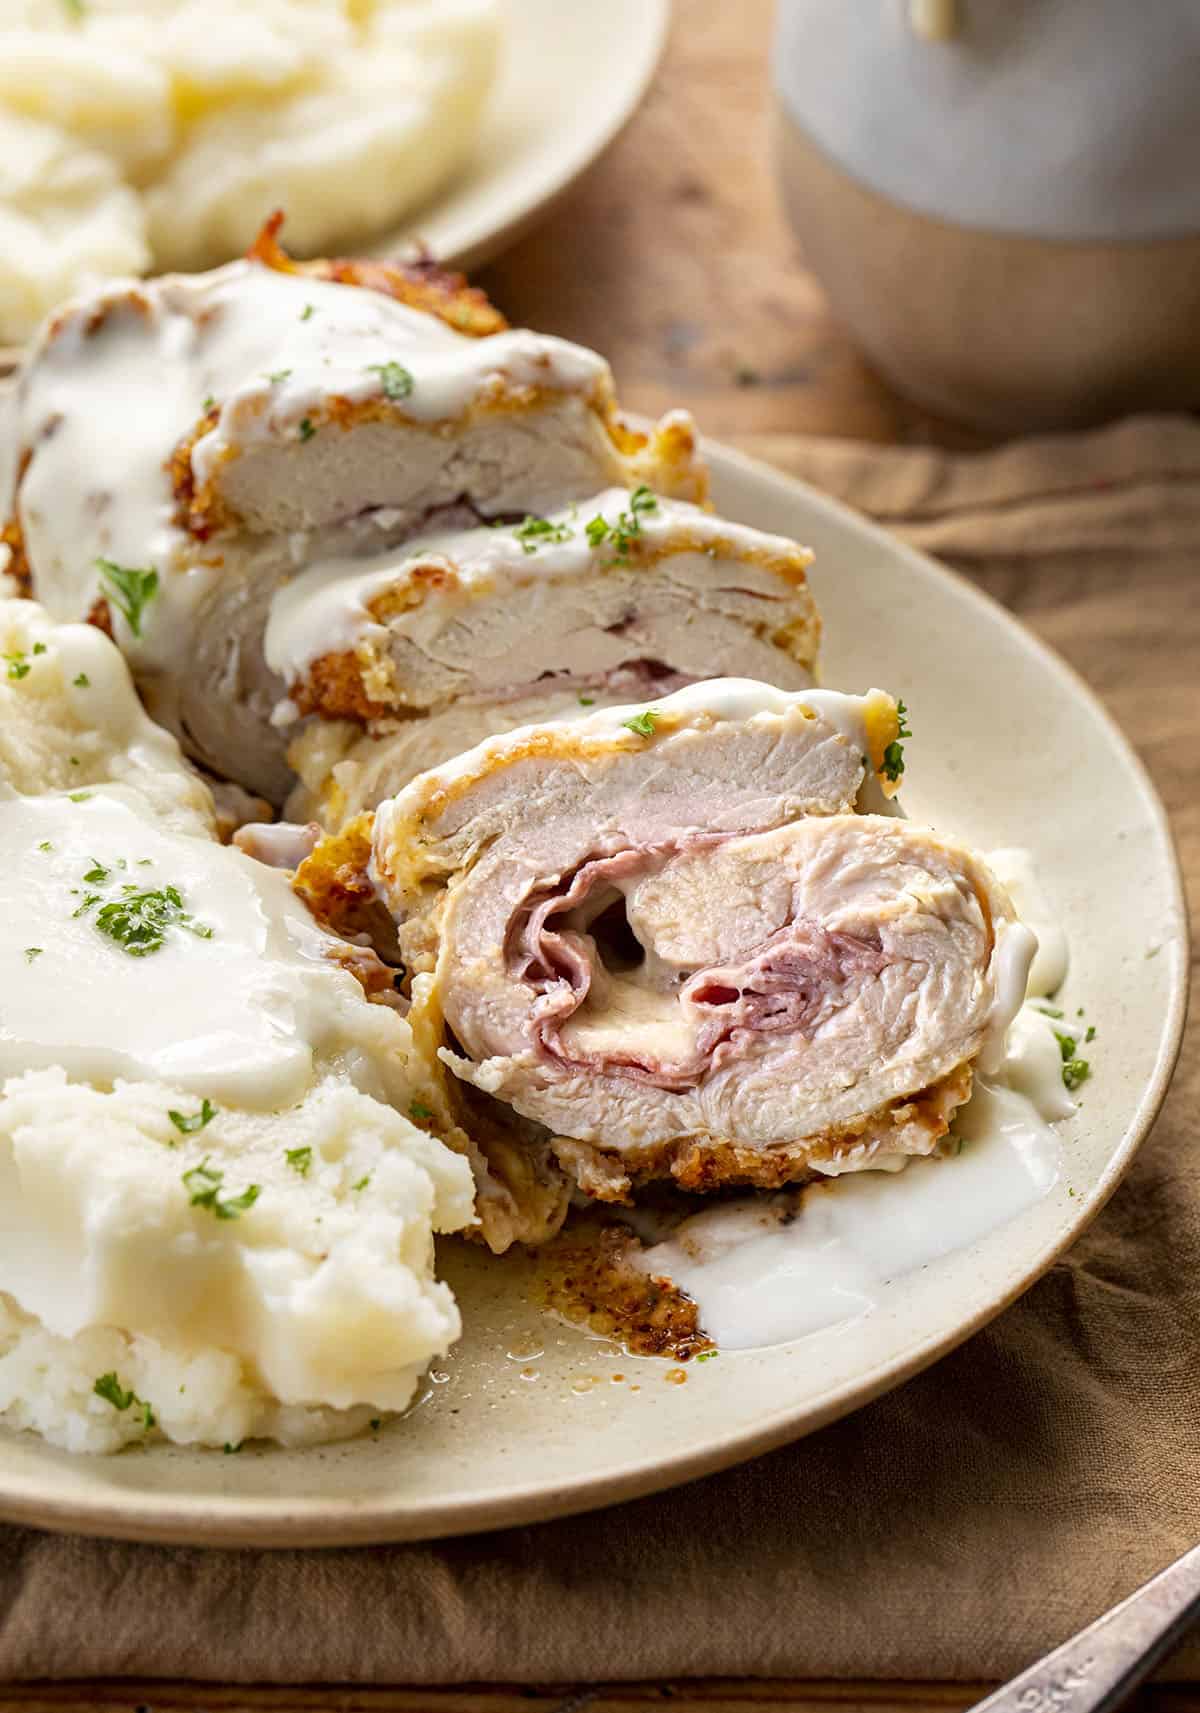 Sliced Chicken Cordon Bleu on a Plate with Mashed Potatoes and Swiss Cheese Sauce. Dinner, Supper, Air Fryer Recipes, Chicken, Chicken Recipes, Chicken Cordon Bleu, Air Fryer Chicken Cordon Bleu, Swiss Cheese Sauce, How to Make Cheesy Sauce with Swiss Cheese, i am homesteader, iamhomesteader